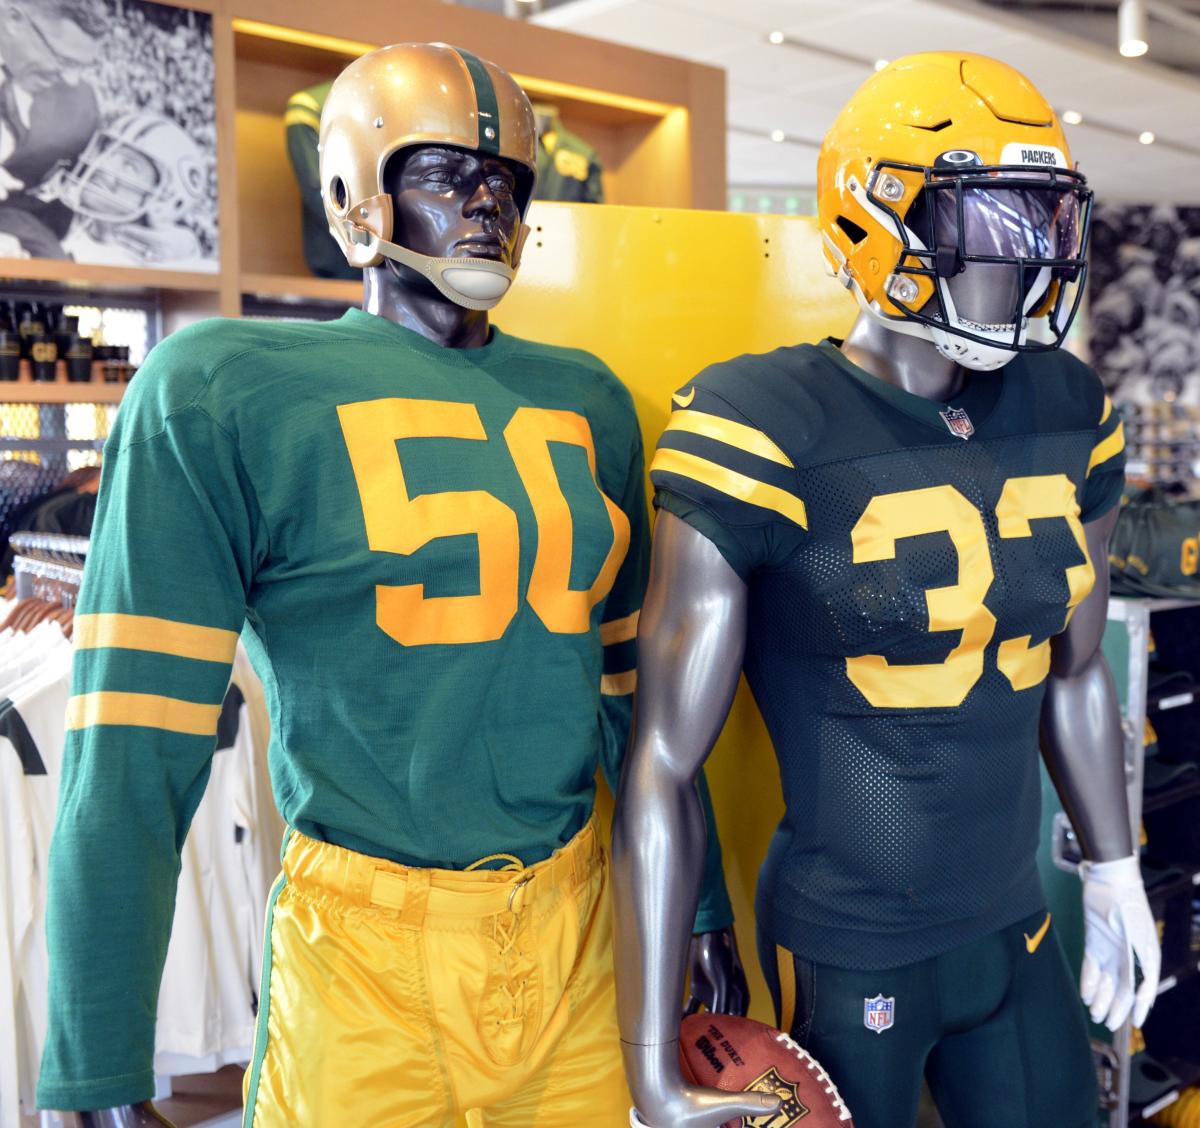 Packers will have a new green-based throwback uniform in 2021